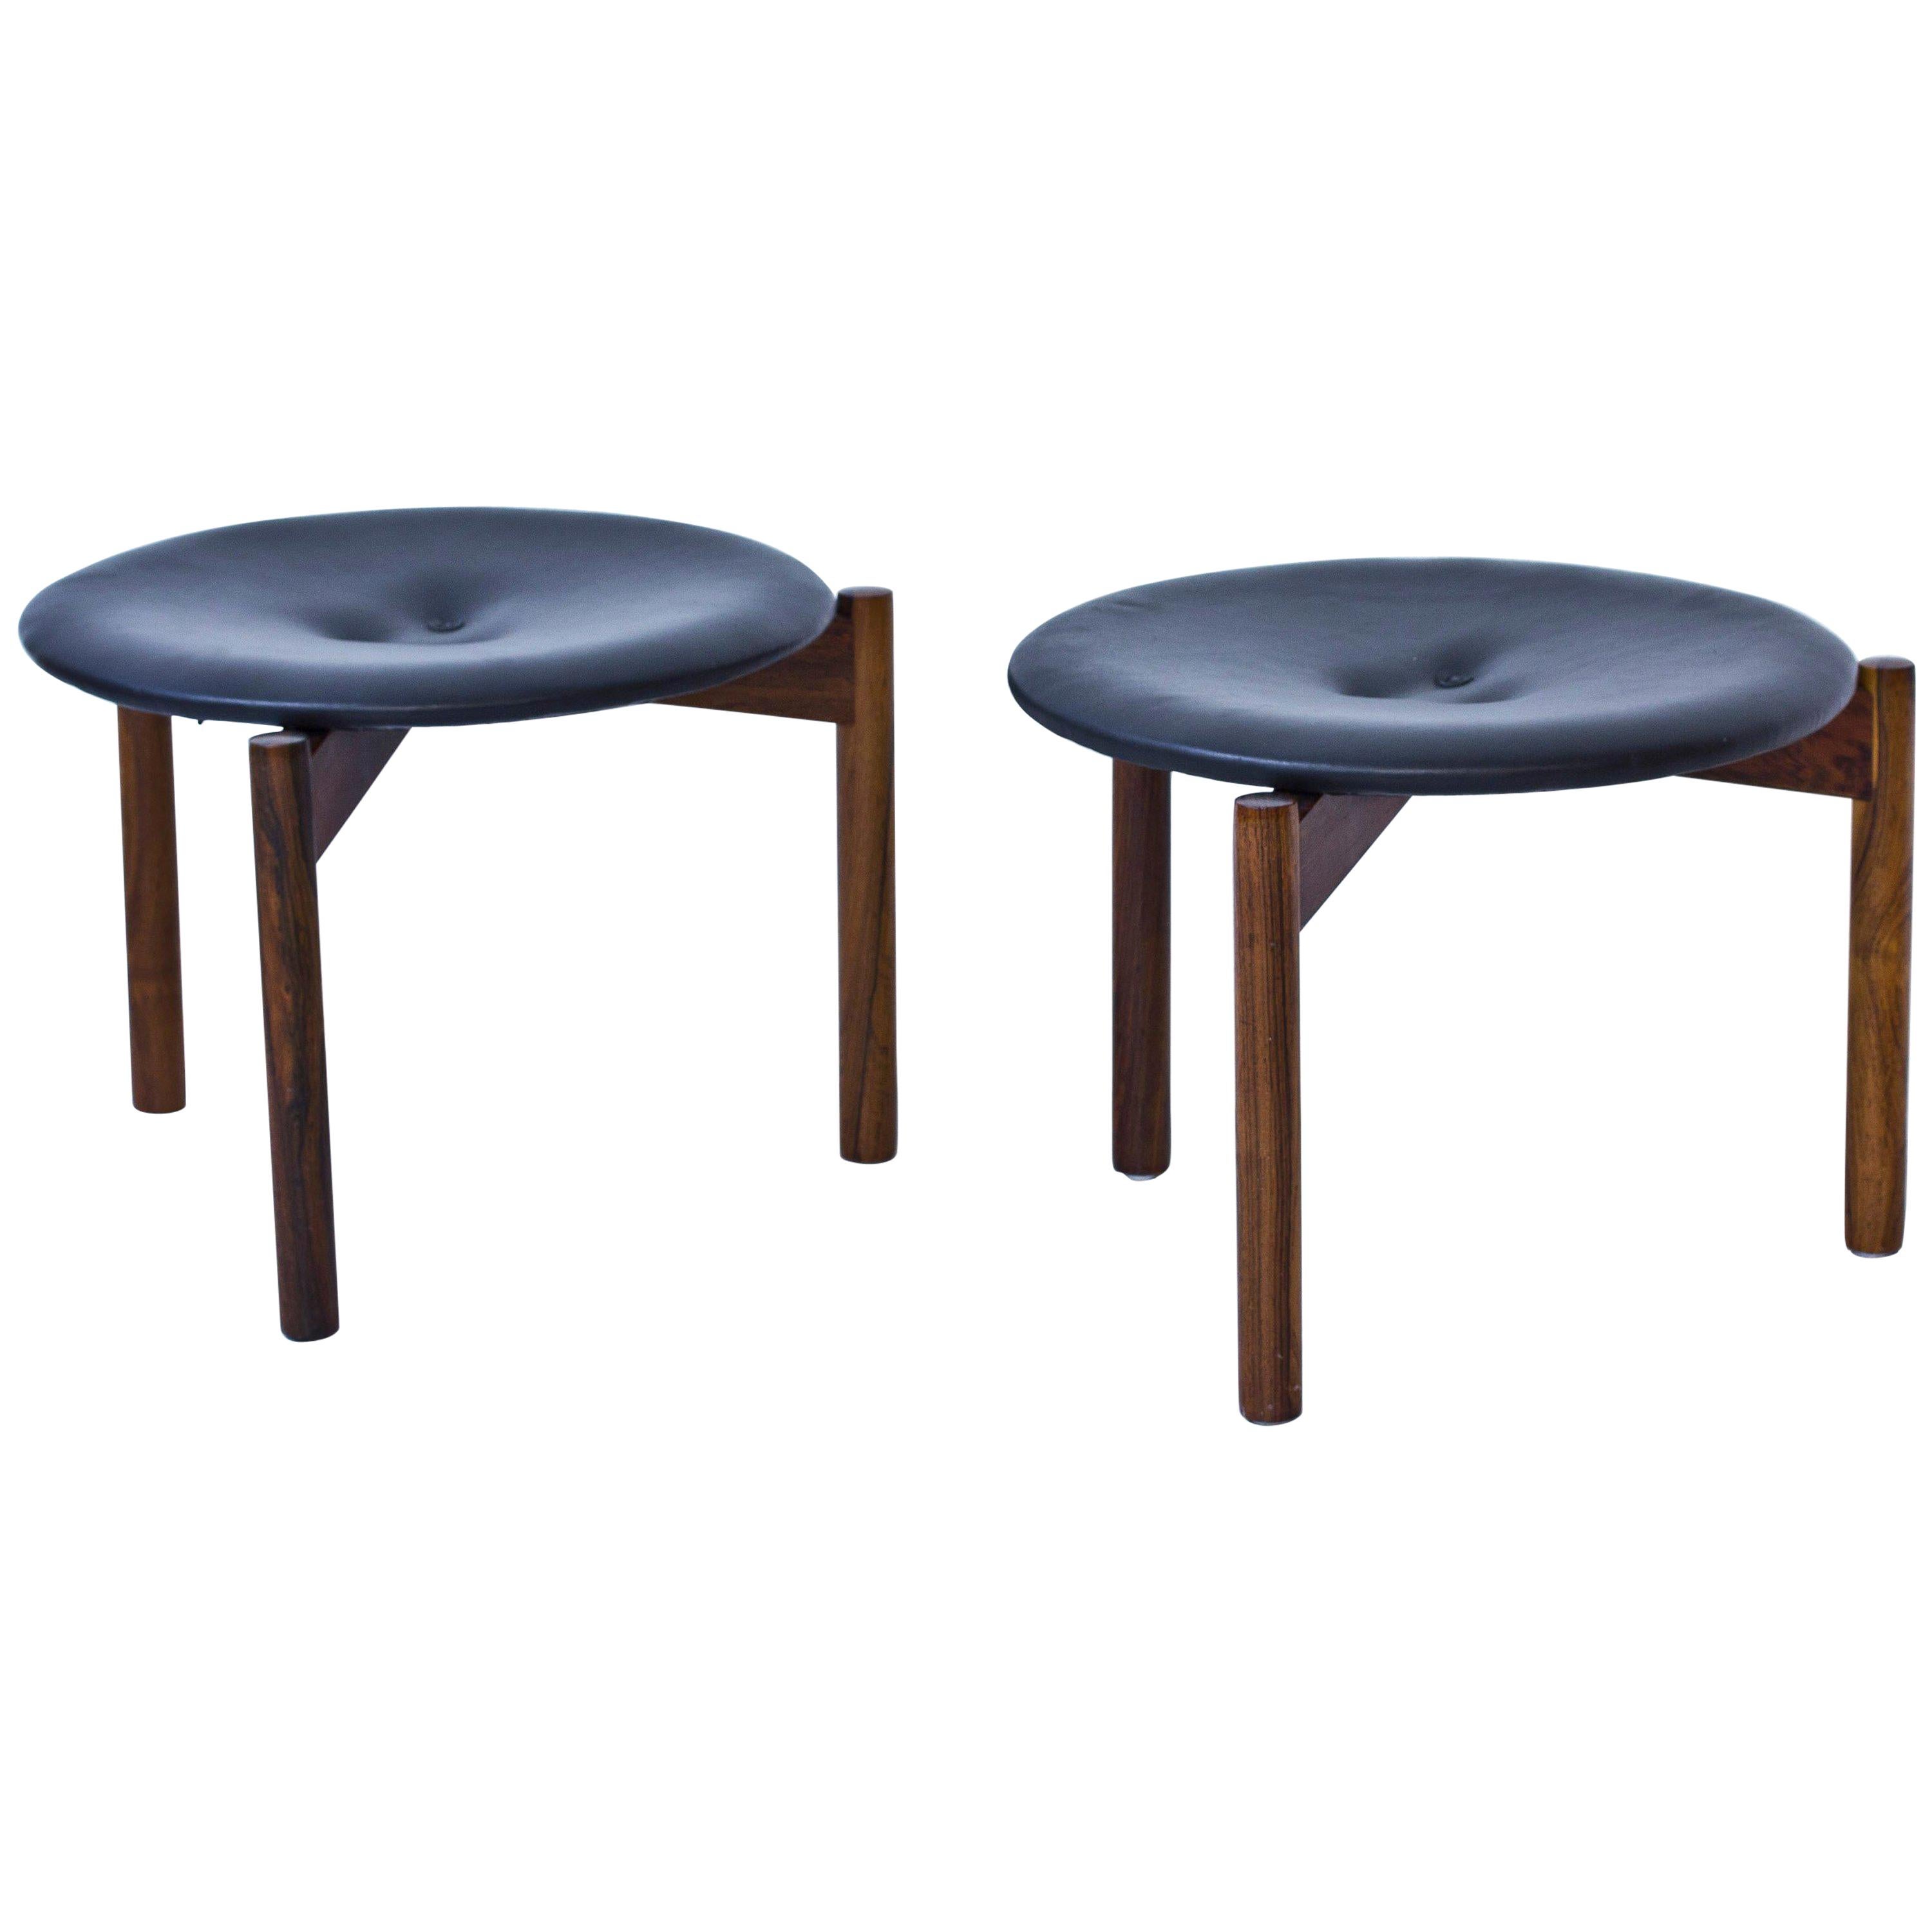 Stools by Uno and Osten Kristiansson for Luxus, Sweden, 1950s